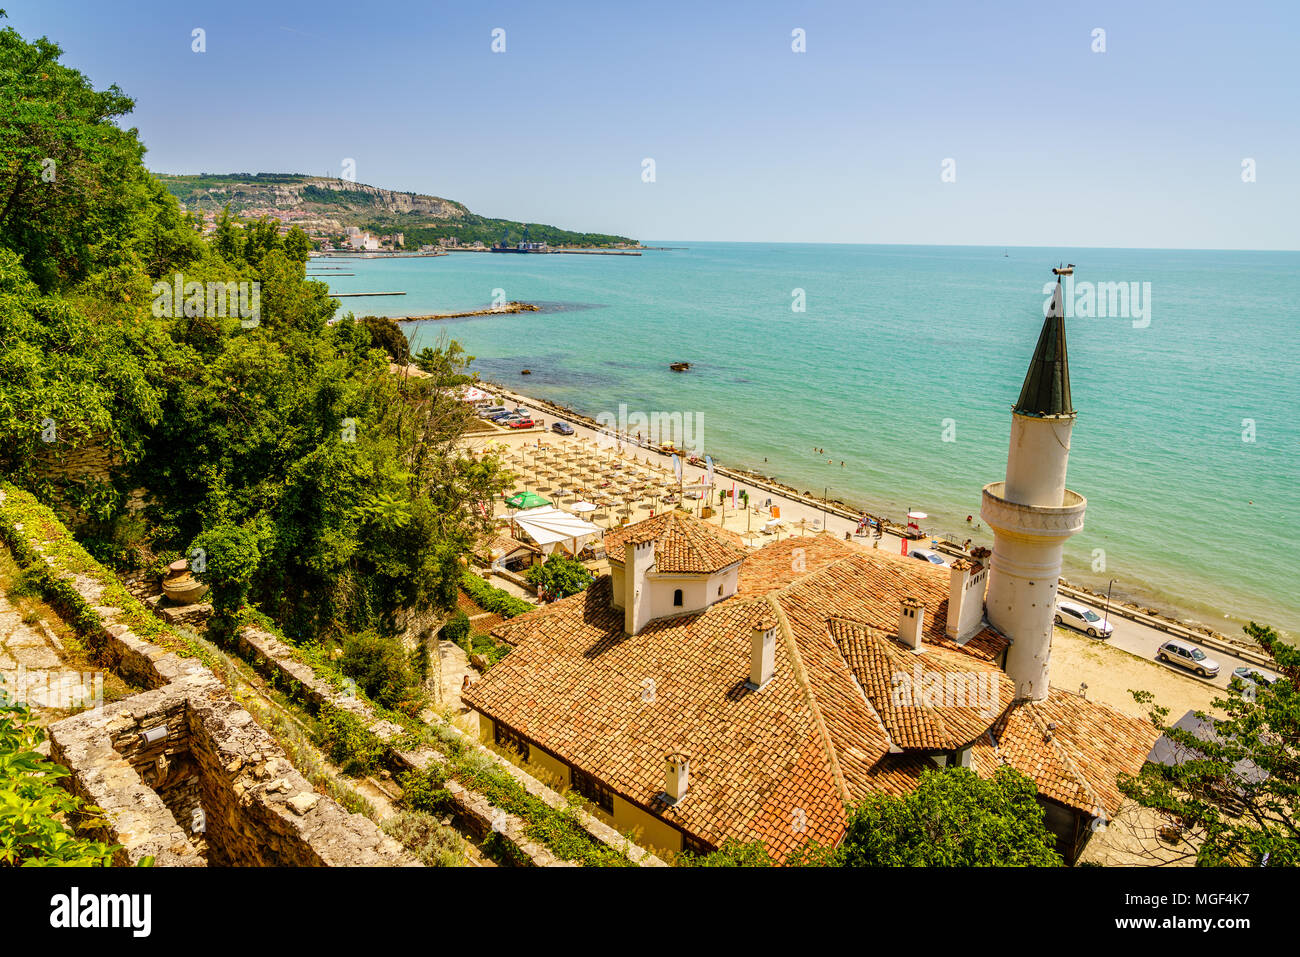 Scenic view of Black Sea coast in Balchik, Bulgaria with Balchik Palace in the foreground Stock Photo